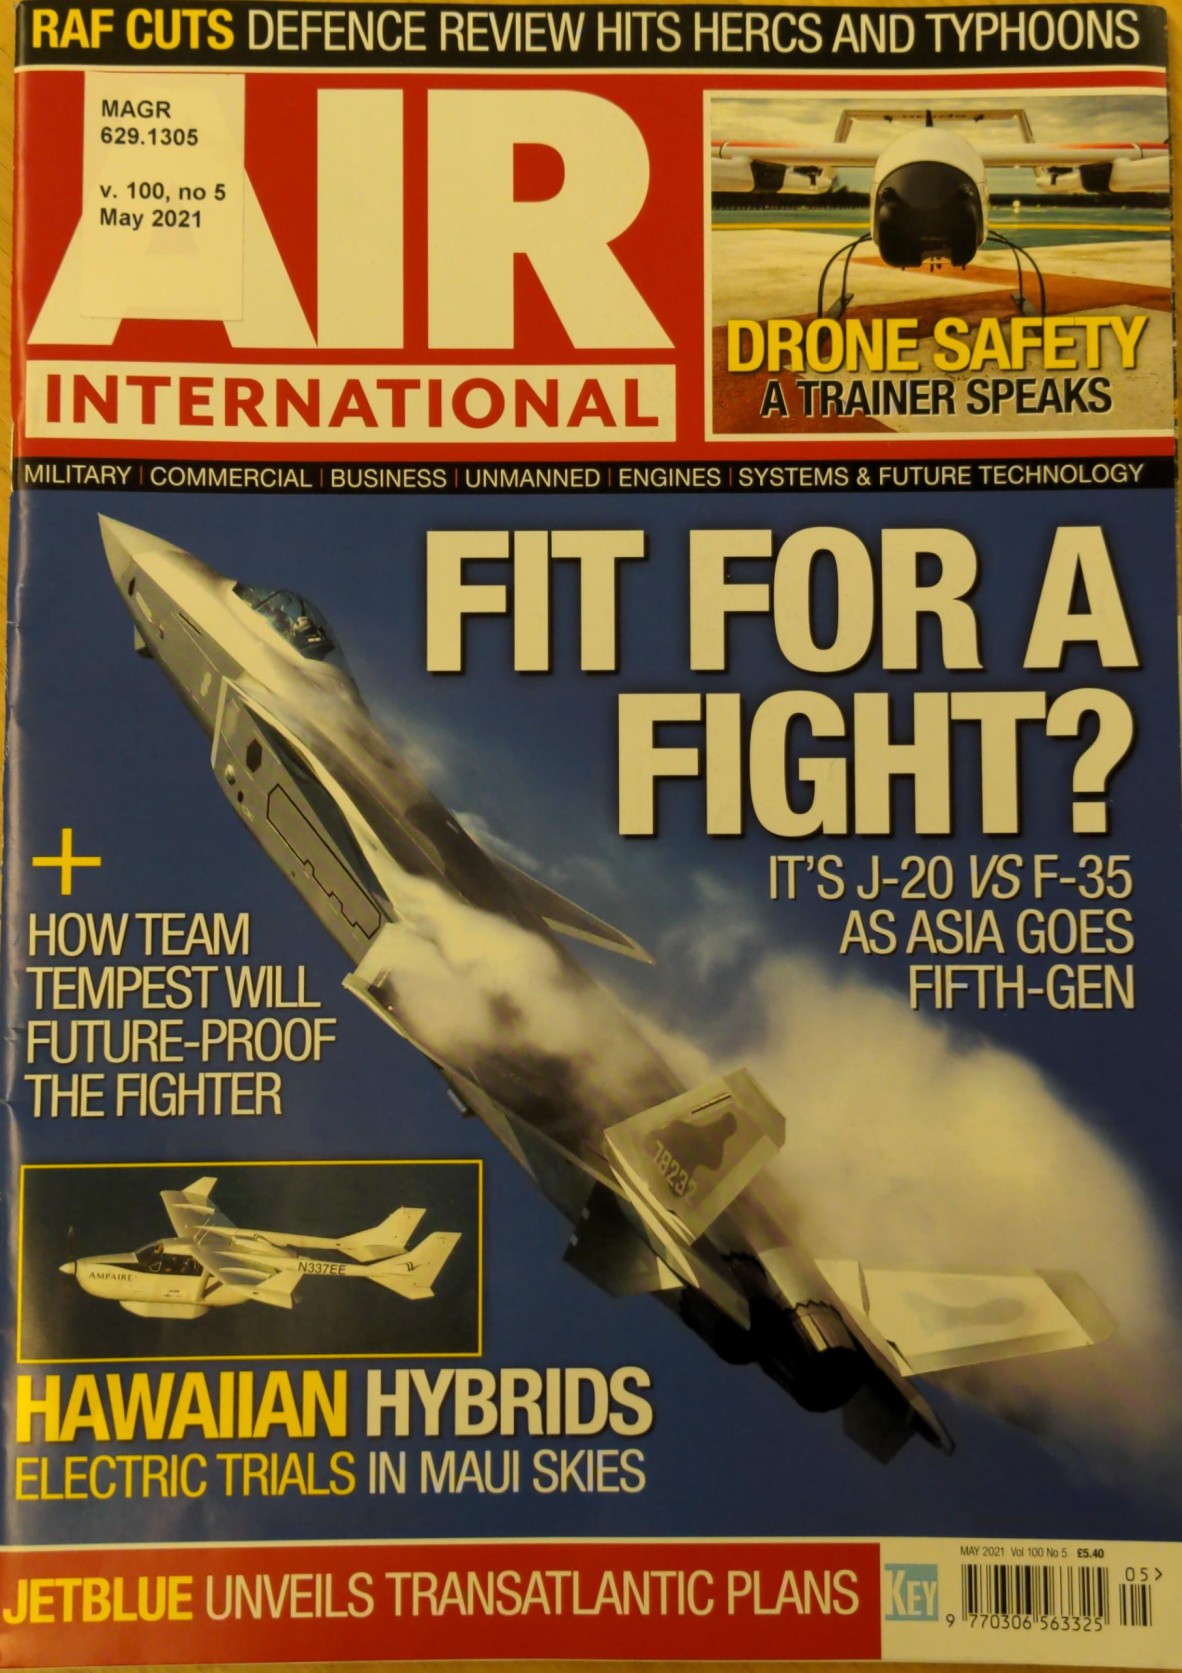 Image of a fighter jet J-20 VS F-35 on front cover of Air International magazine May 2021